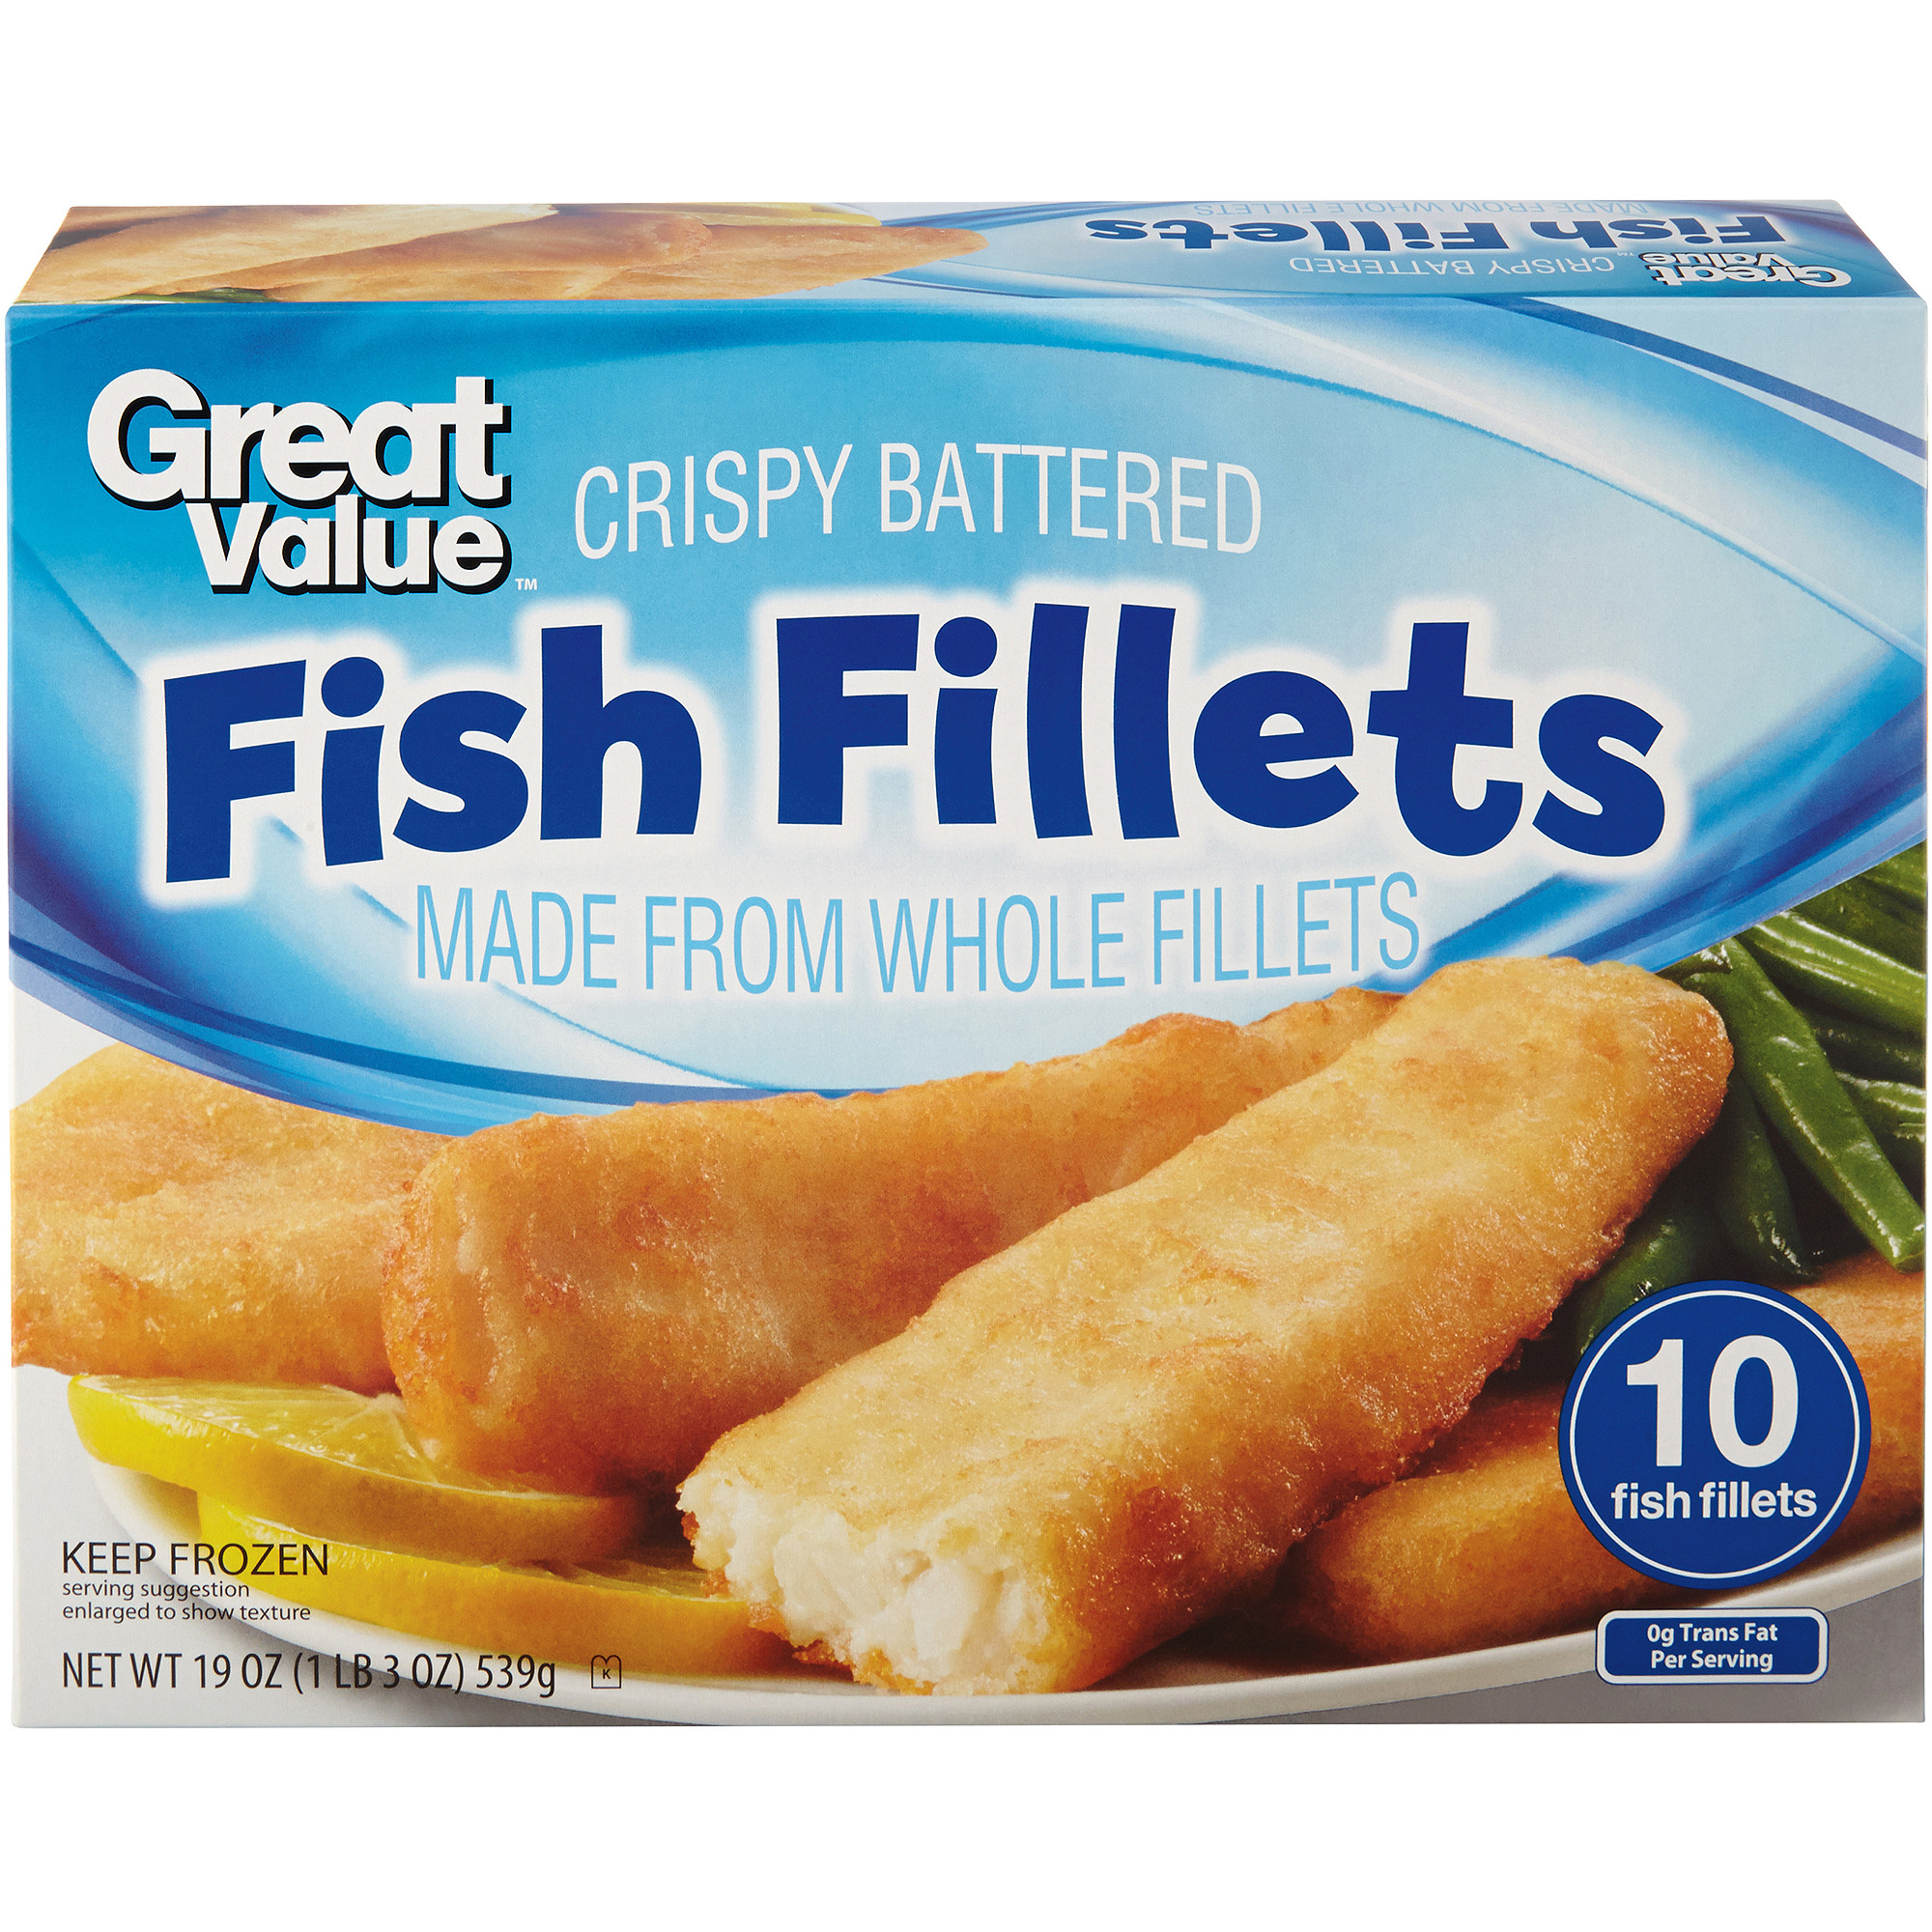 Microwaved Fish Recipes
 gorton fish fillets microwave